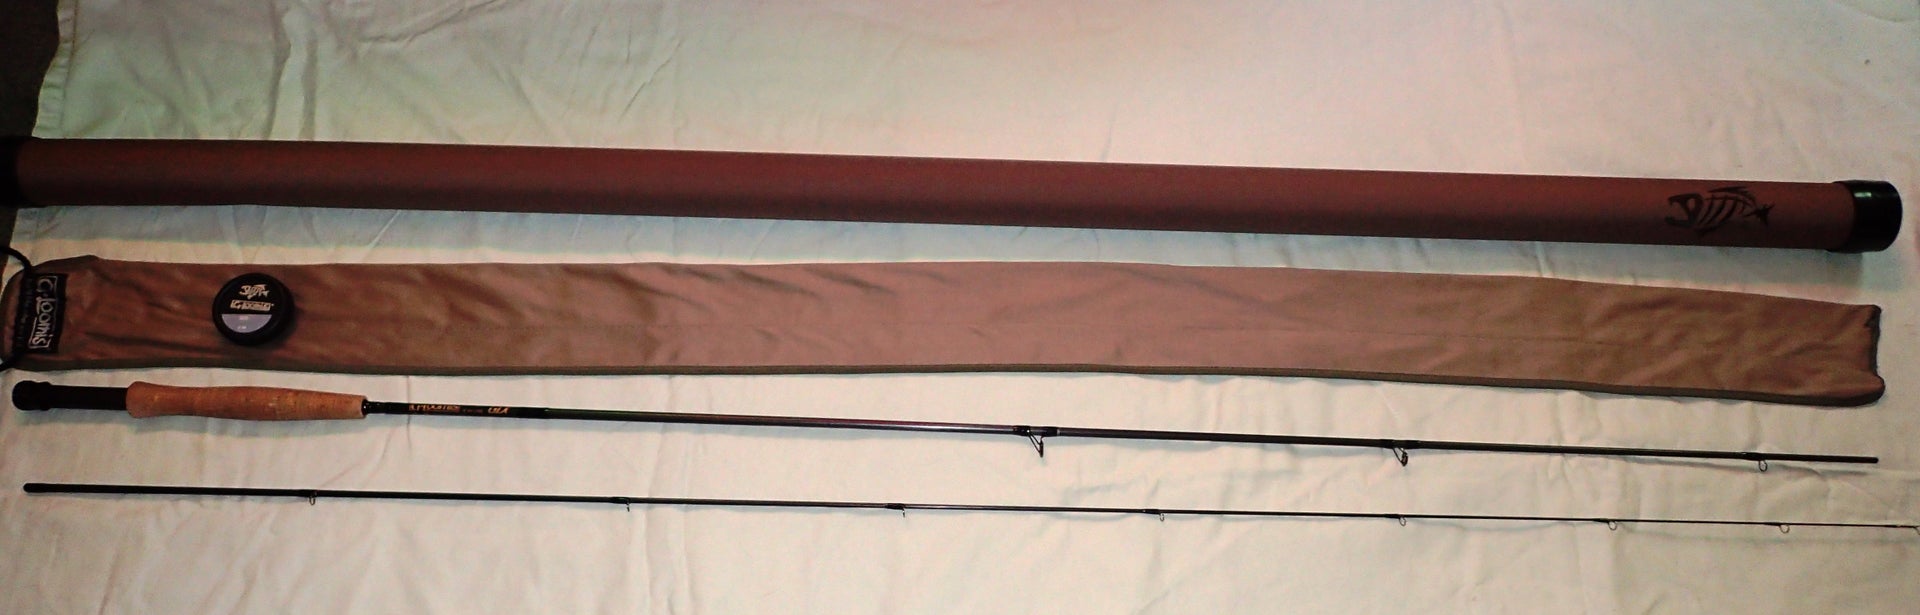 G Loomis GLX Classic 9FT 4WT 2PC GREAT SHAPE **PRICE REDUCTION